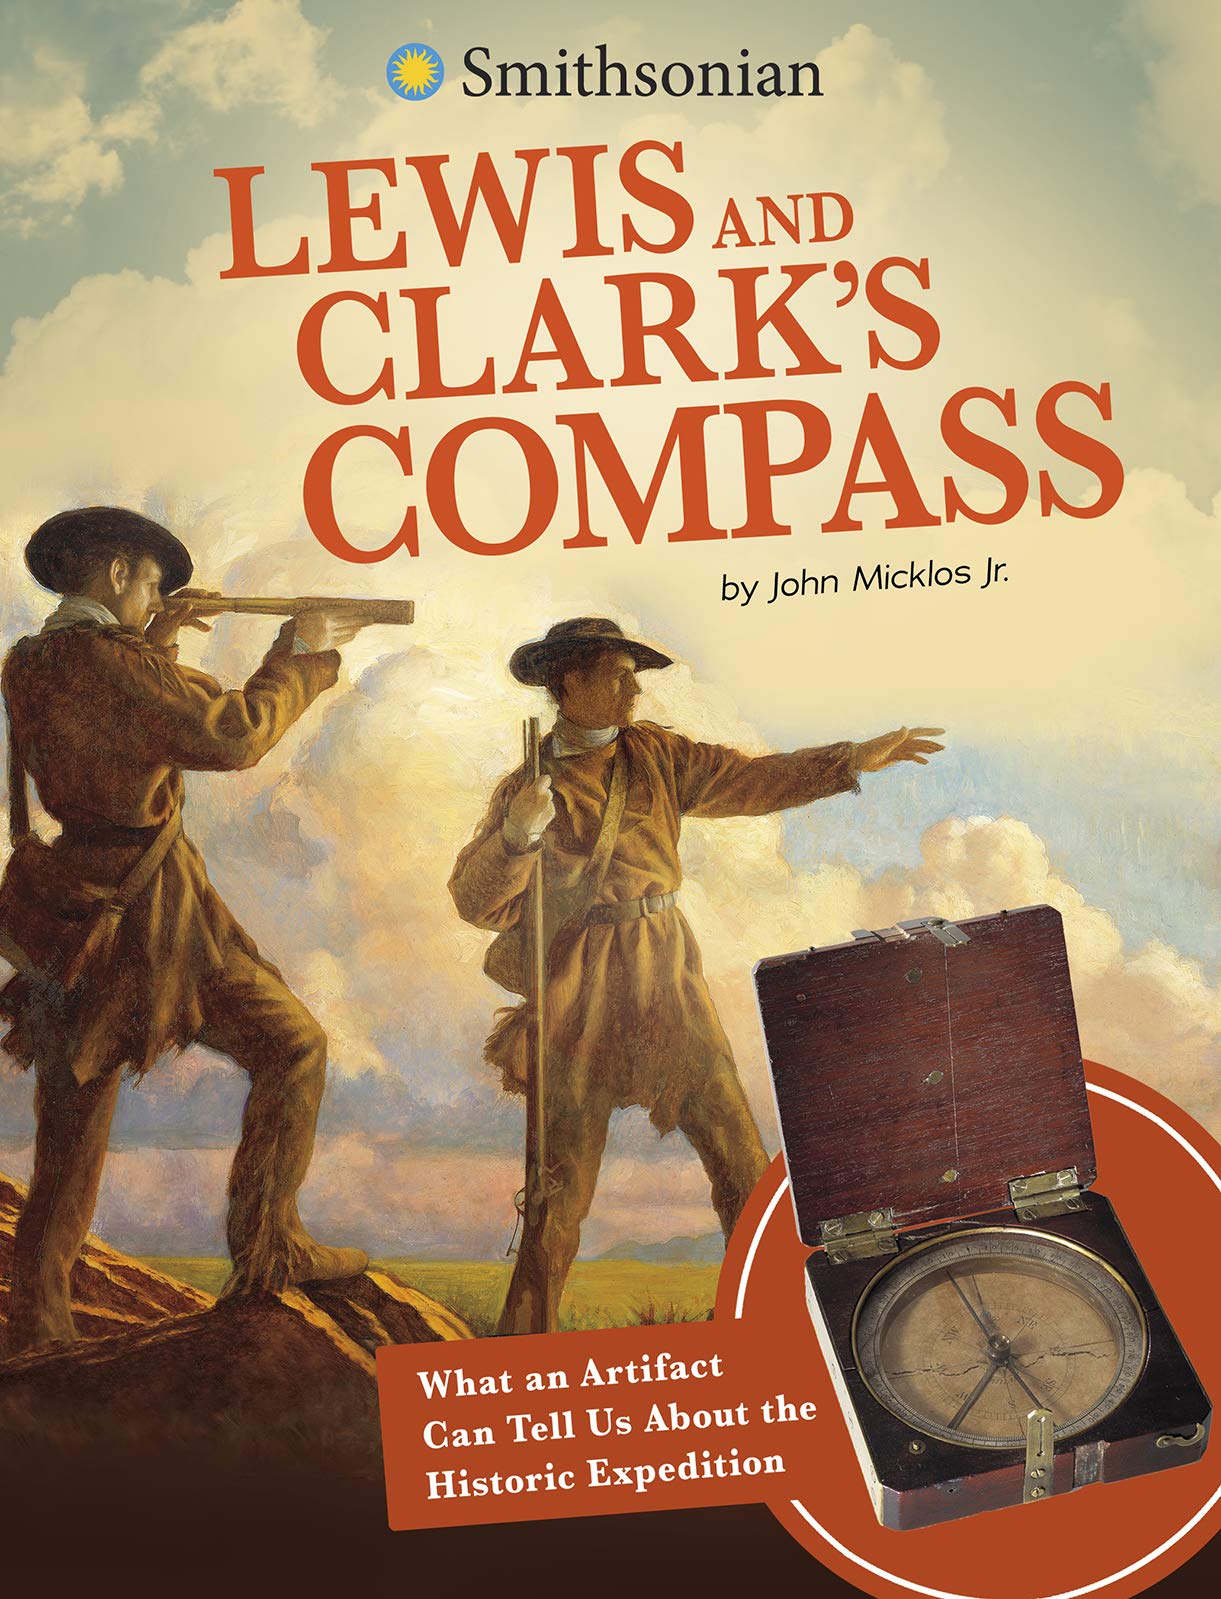 Lewis and Clark's Compass: What an Artrifact Can Tell Us about the Historic Expedition